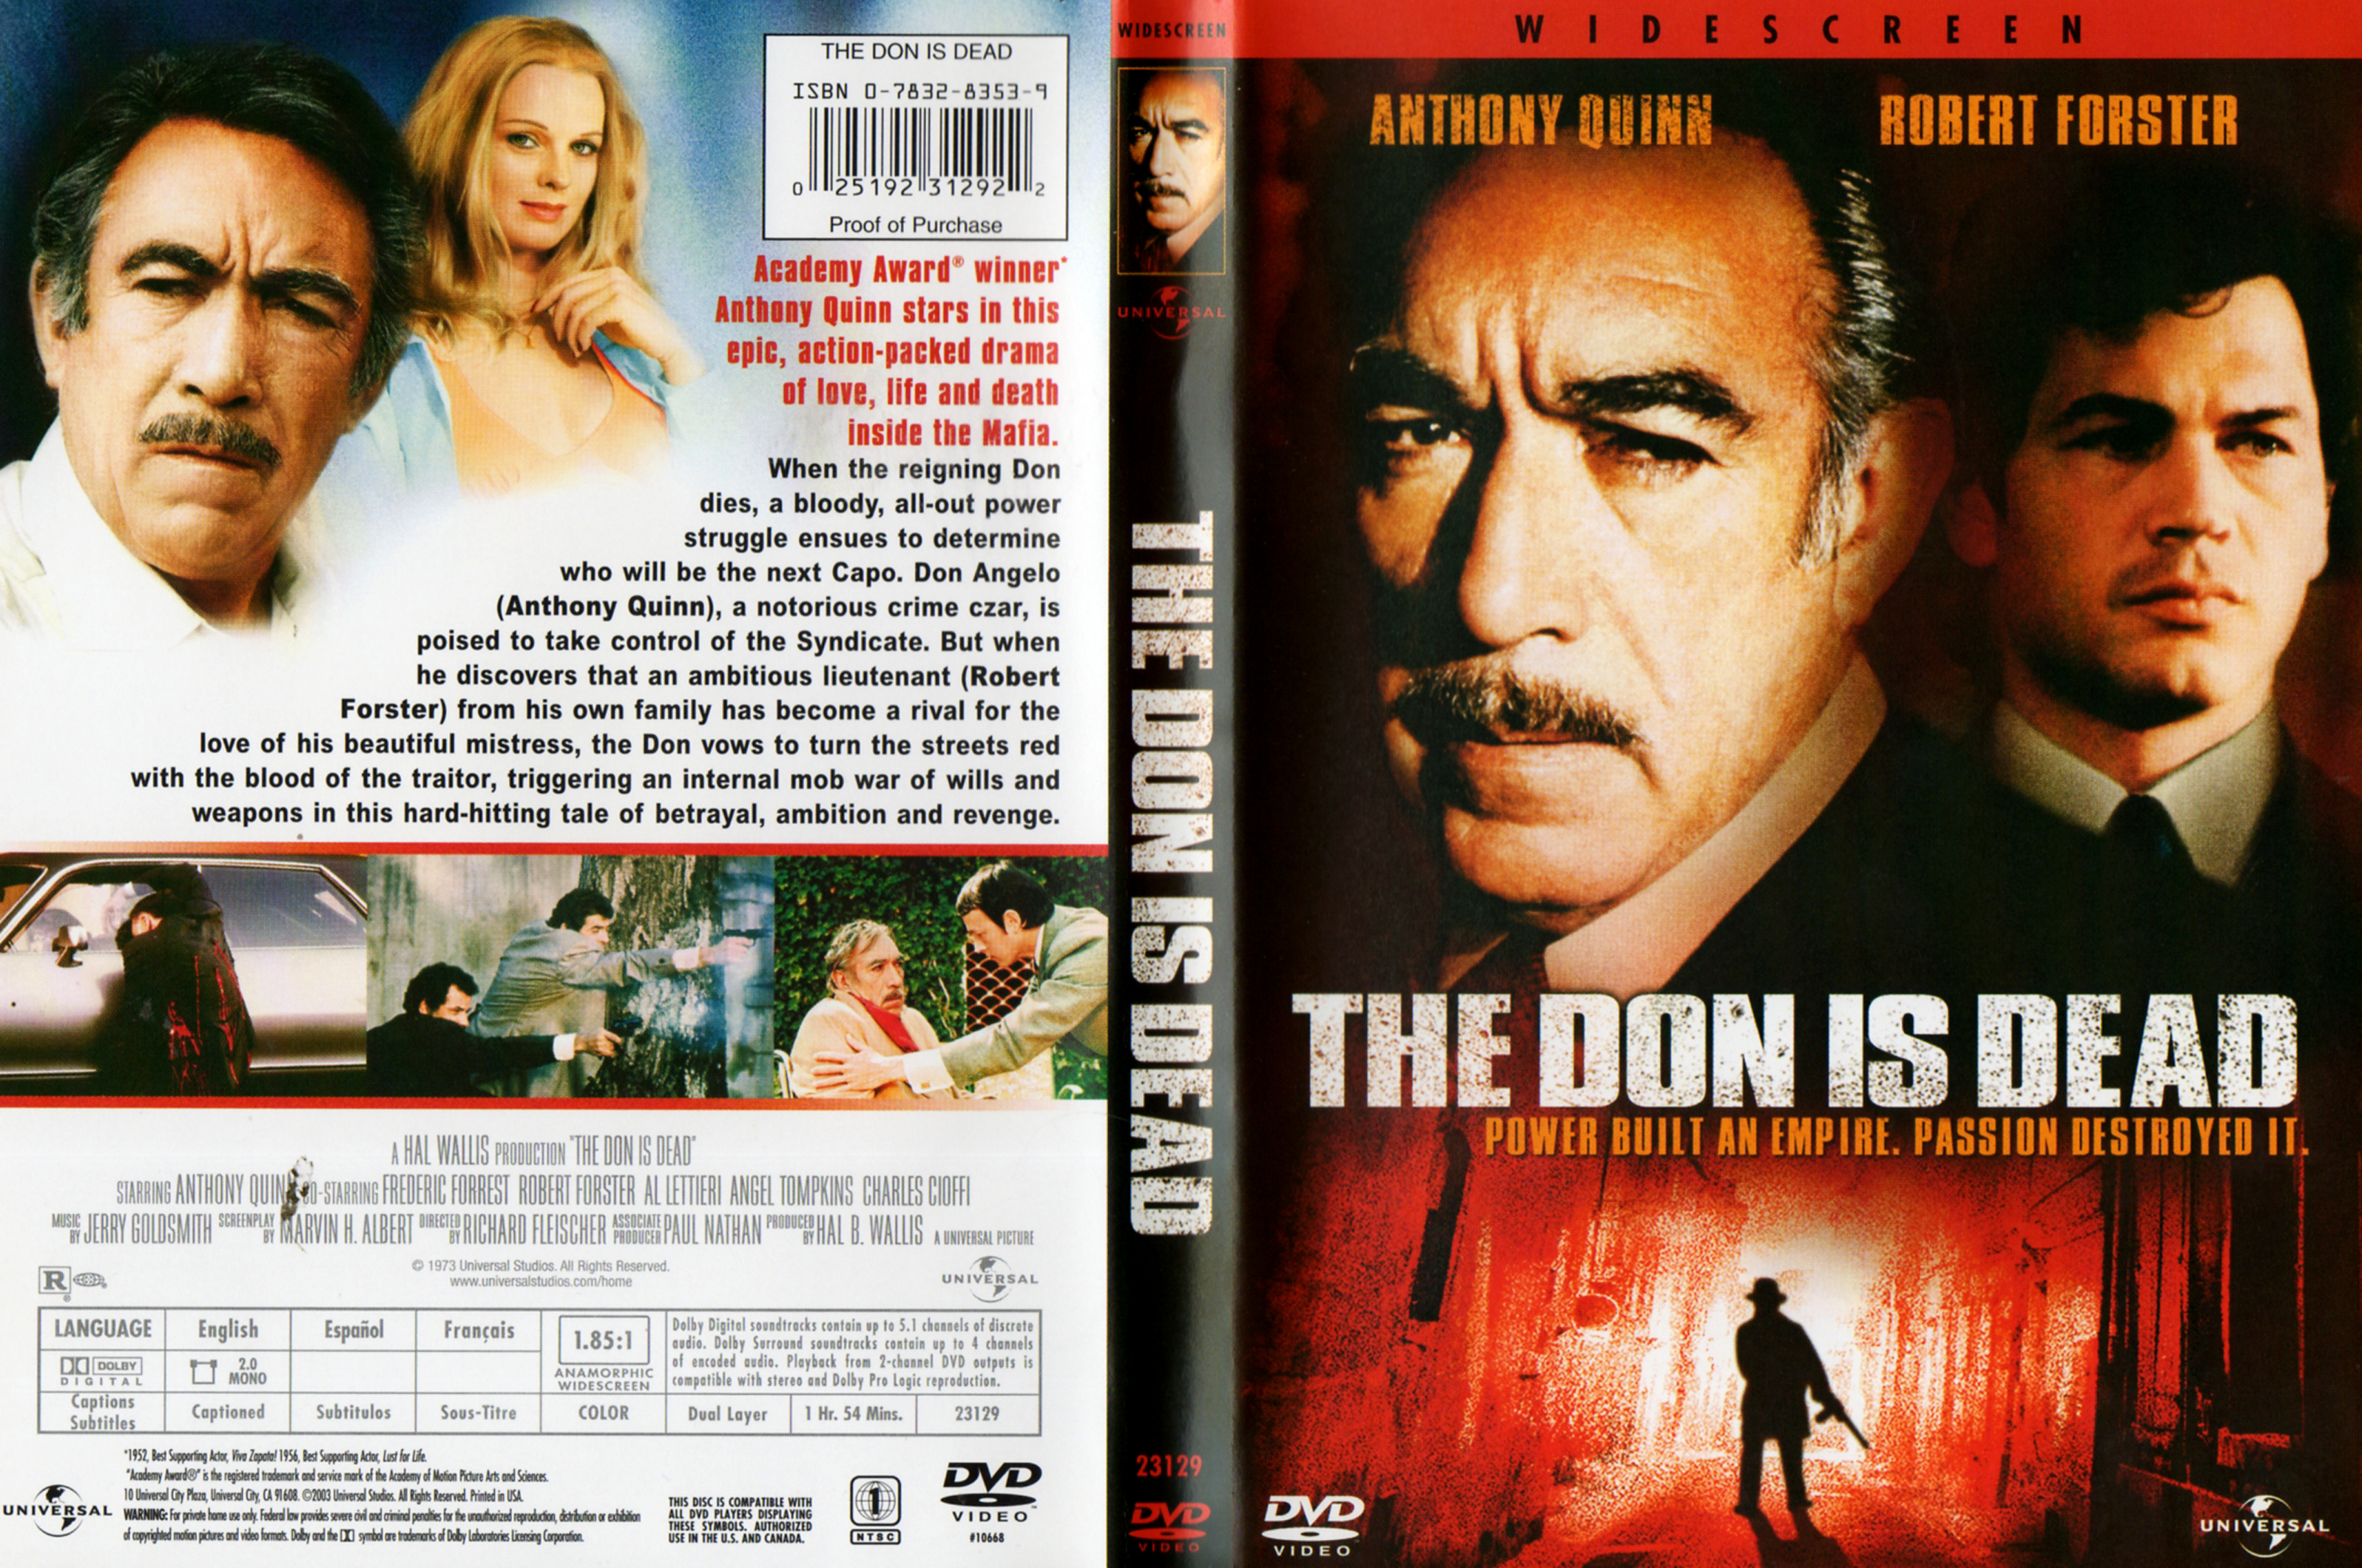 Jaquette DVD The don is dead Zone 1